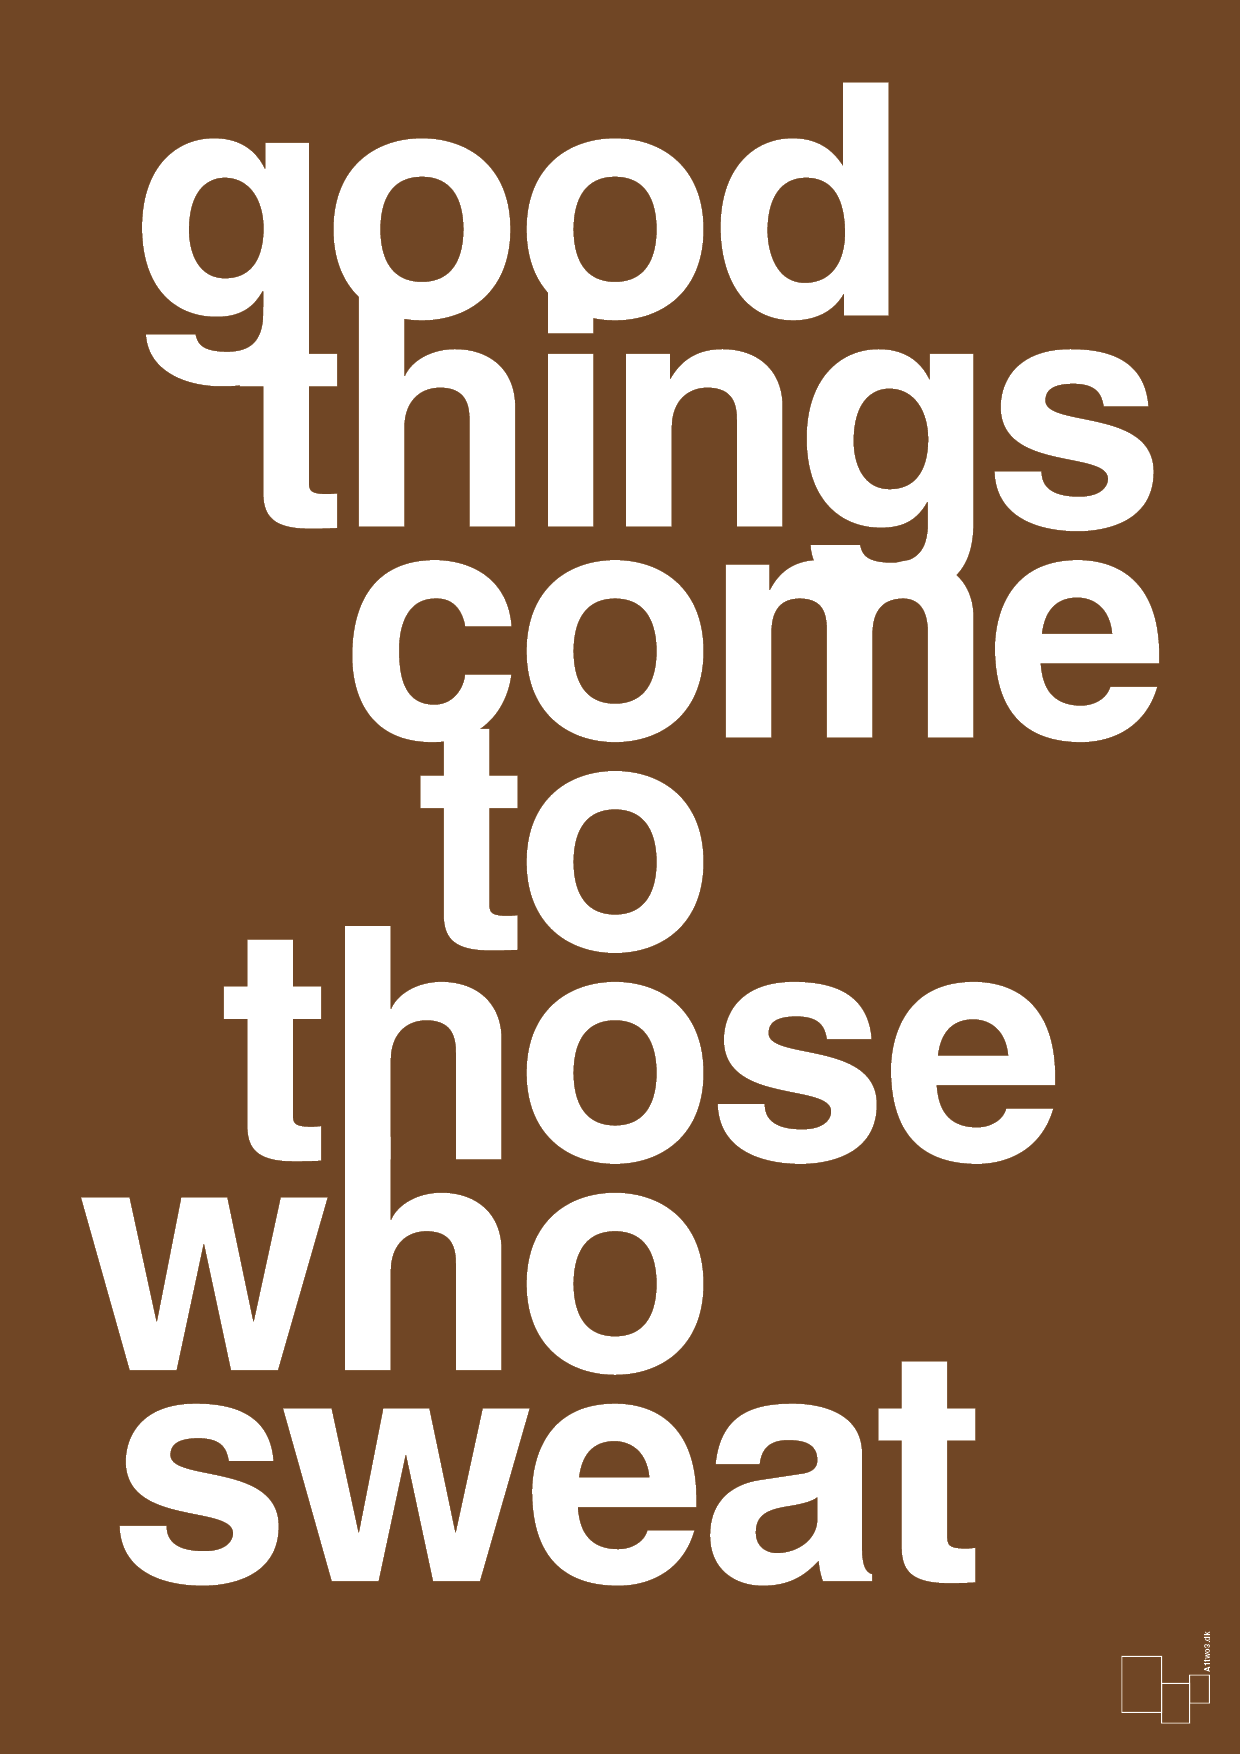 good things come to those who sweat - Plakat med Sport & Fritid i Dark Brown